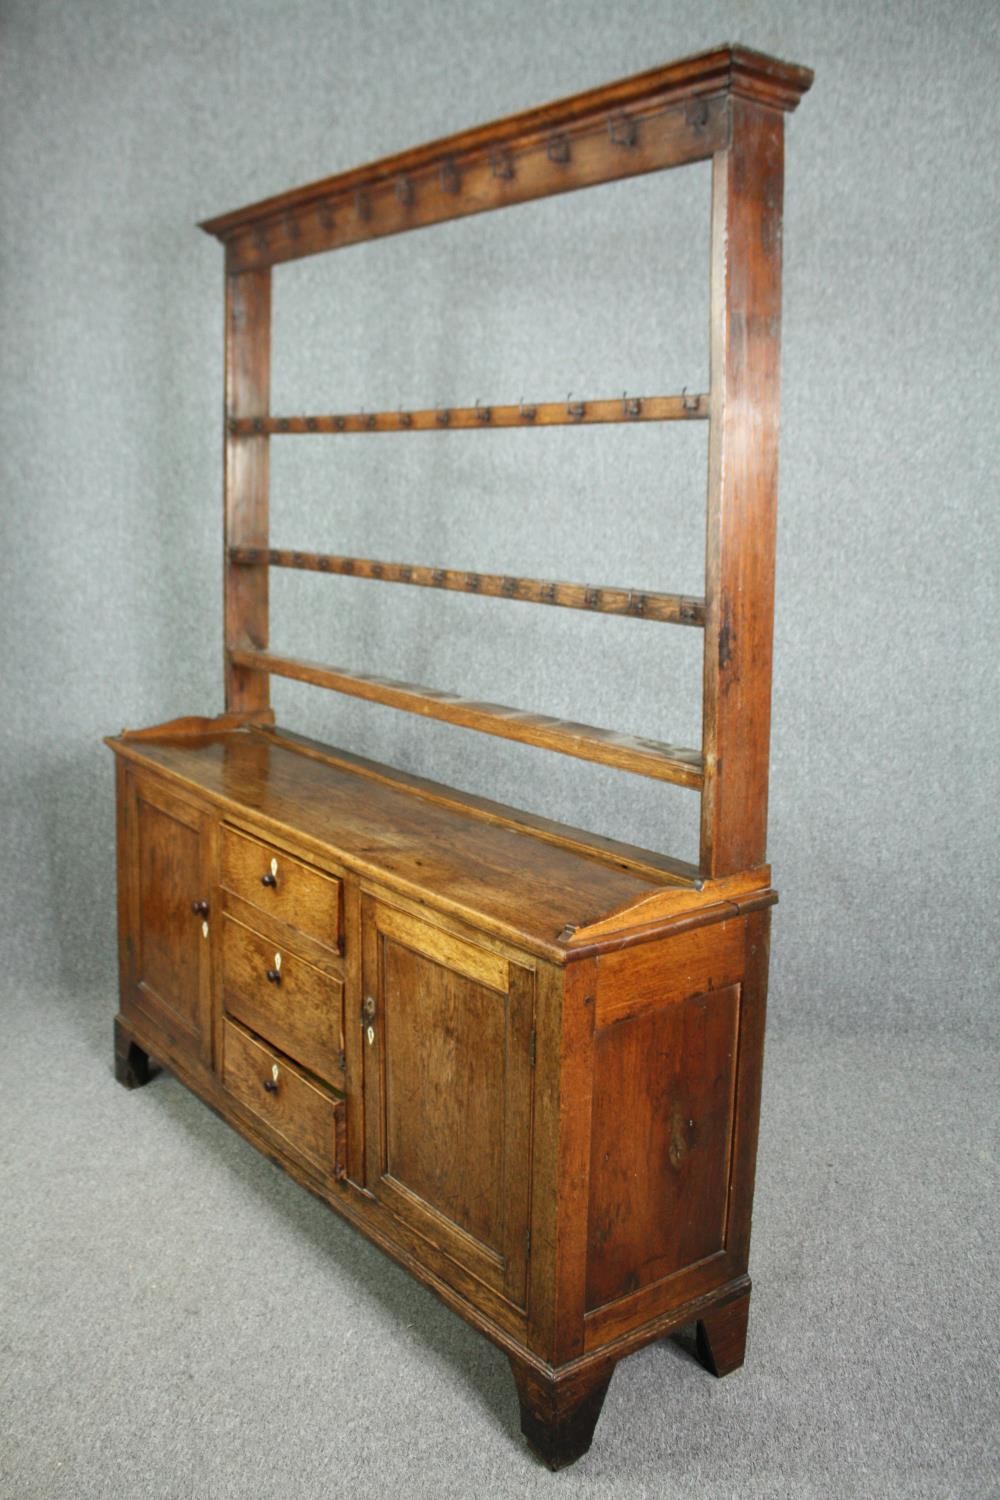 Dresser, 19th century country oak with upper open plate rack above base fitted with drawers - Image 2 of 11